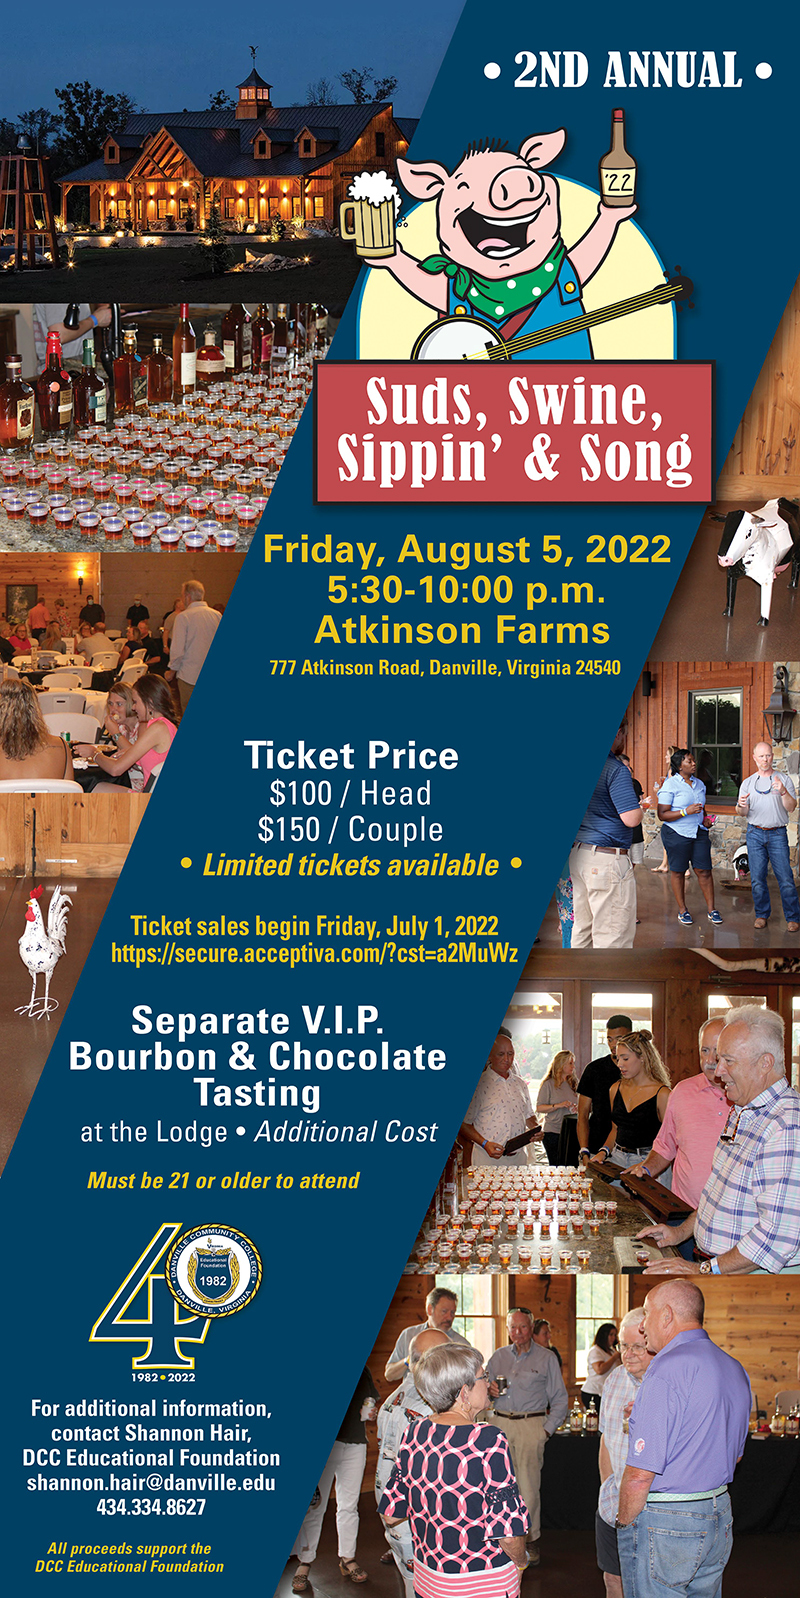 graphic promoting the Suds, Swine, Sippin', and Song fundraiser with the DCC Educational Foundation